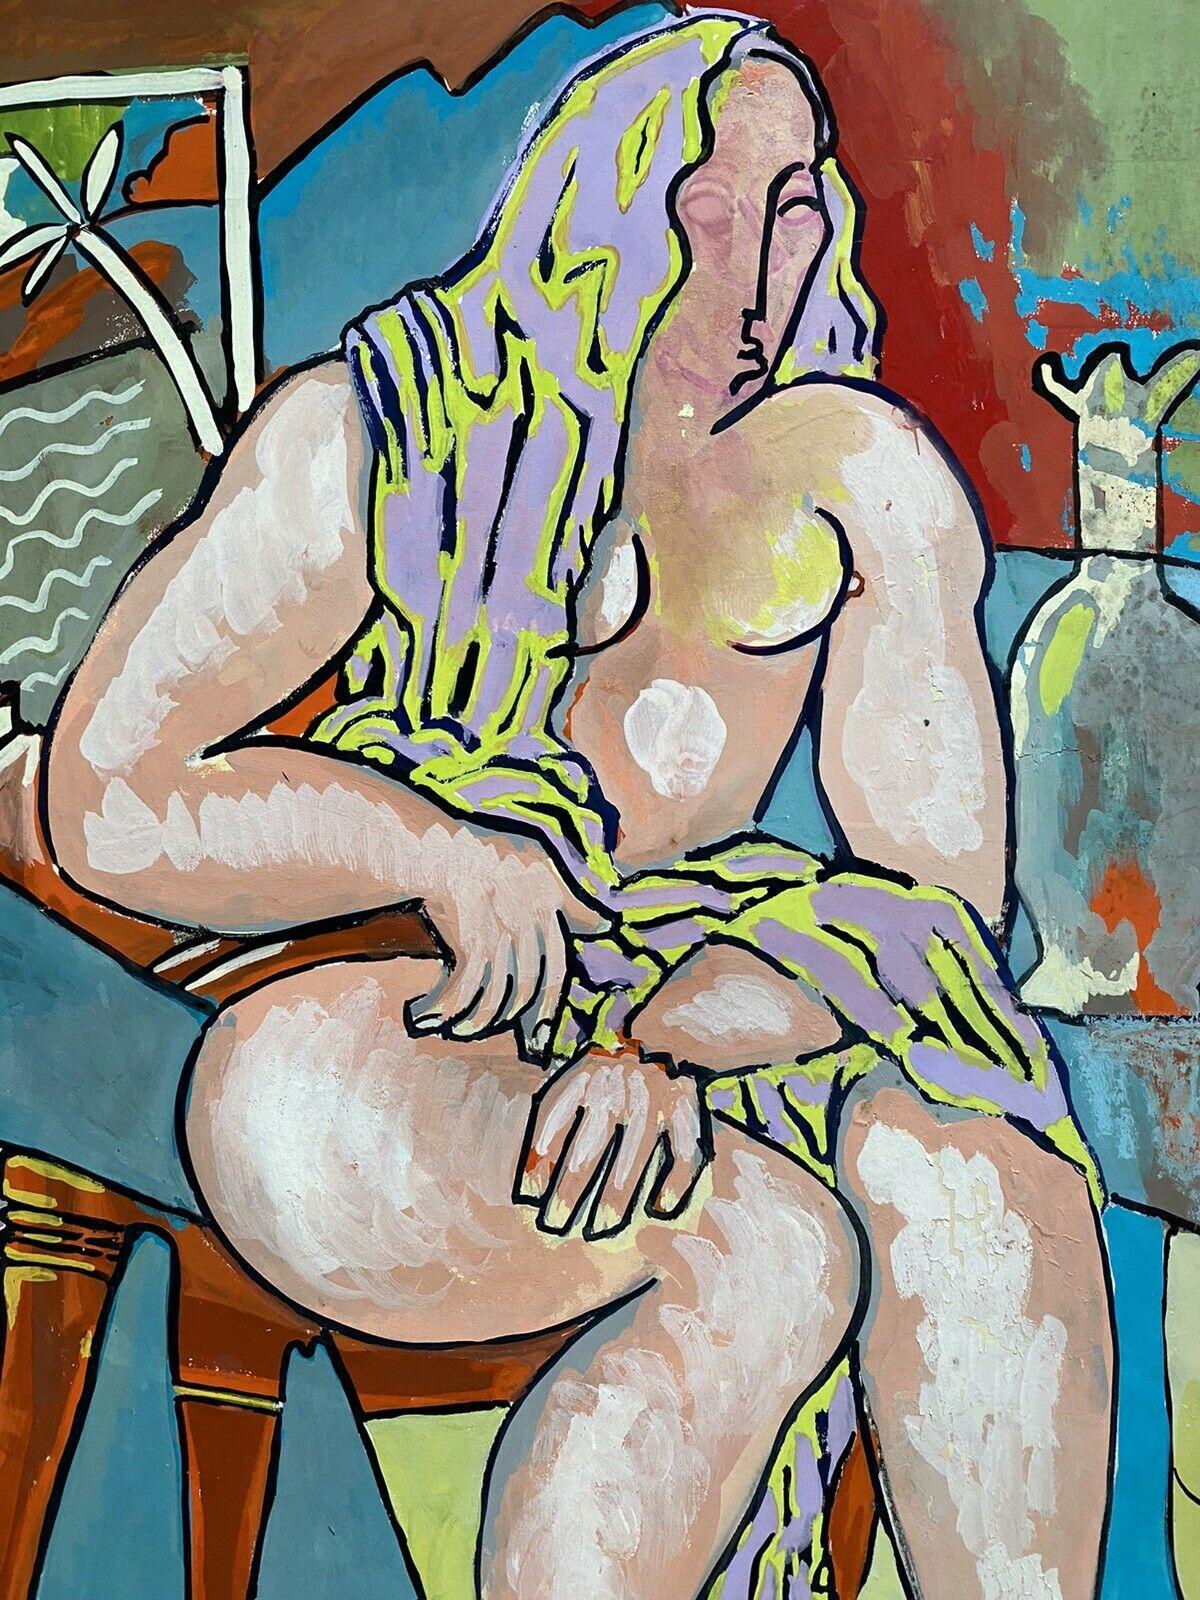 20th CENTURY FRENCH MODERNIST PAINTING - NUDE FIGURE COLORFUL INTERIOR For Sale 2